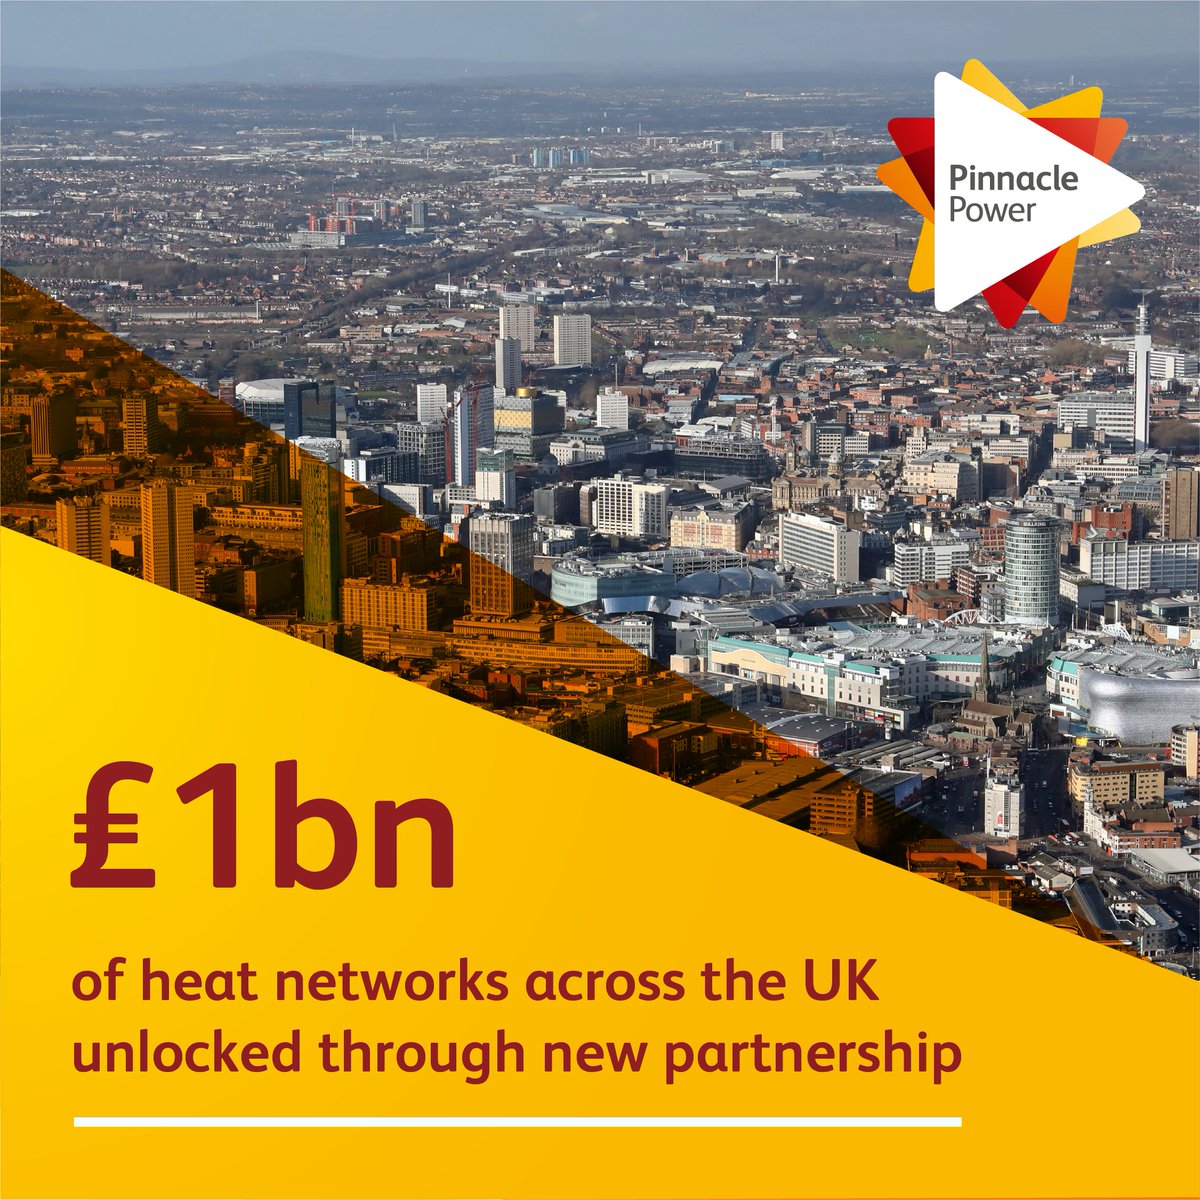 Our new partnership with DIF Capital Partners will unlock £1bn of heat networks and:

🟢 Turbocharge the UK’s heat network capability
🟢 Improve the UK’s energy security
🟢 Save up to 200k tonnes of CO2/yr #NetZero 

Find out more: pinnaclepower.co.uk/news 

#heatnetworks #news